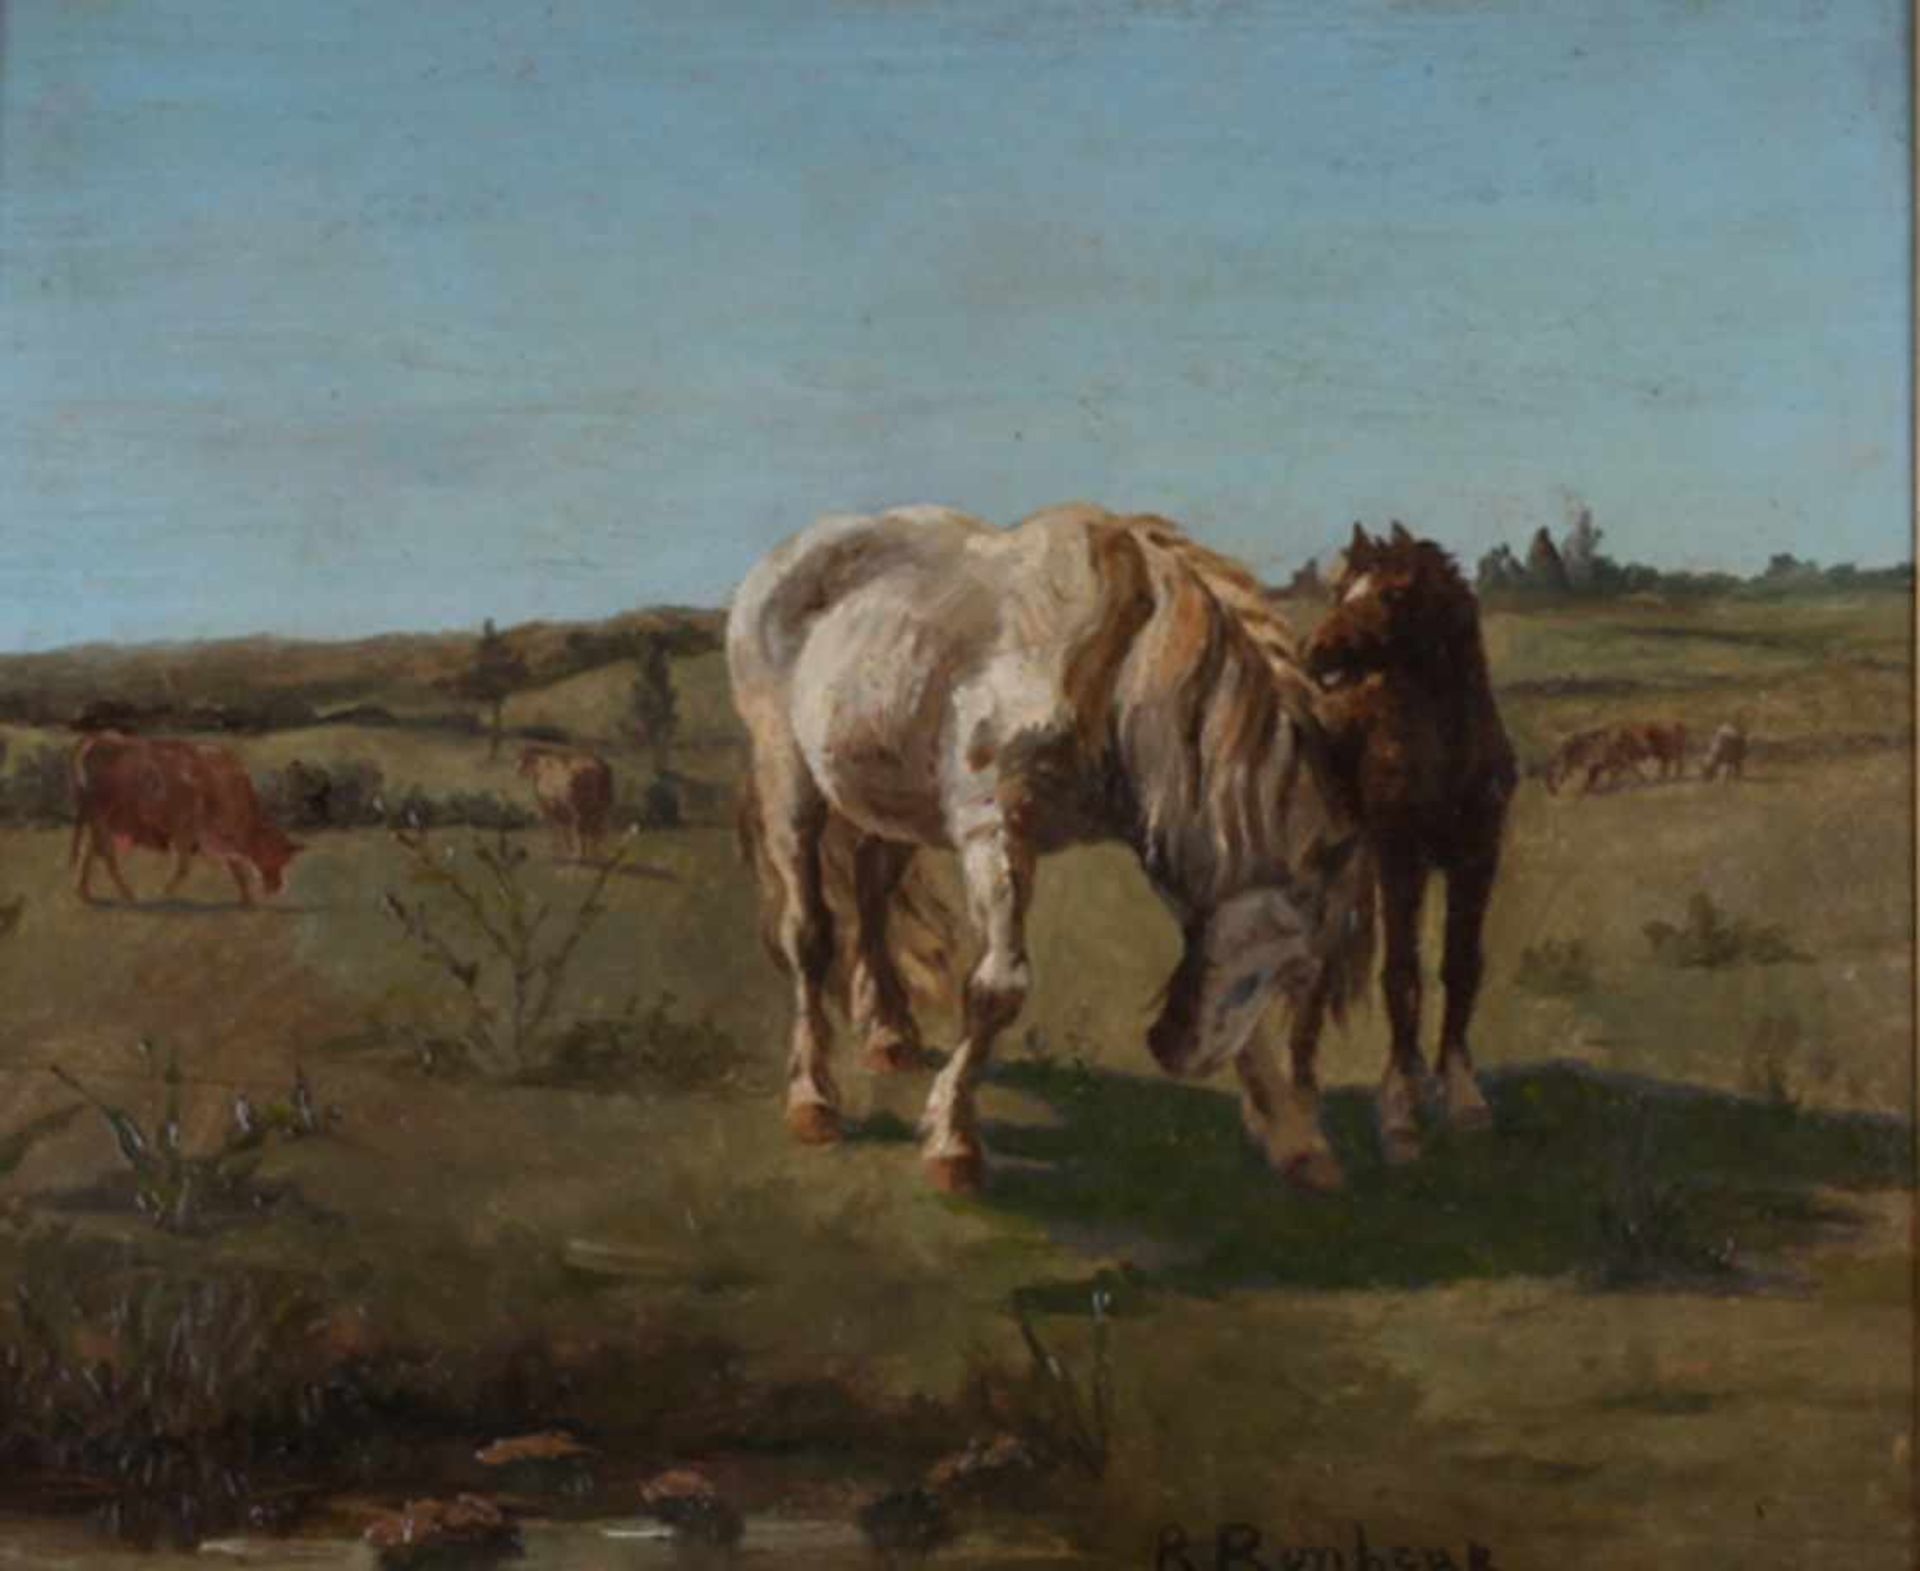 Bonheur, Rosa. Horses. [Second half of the XIX century]. Oil on wood. 21,8x28,5 cm.Signed and